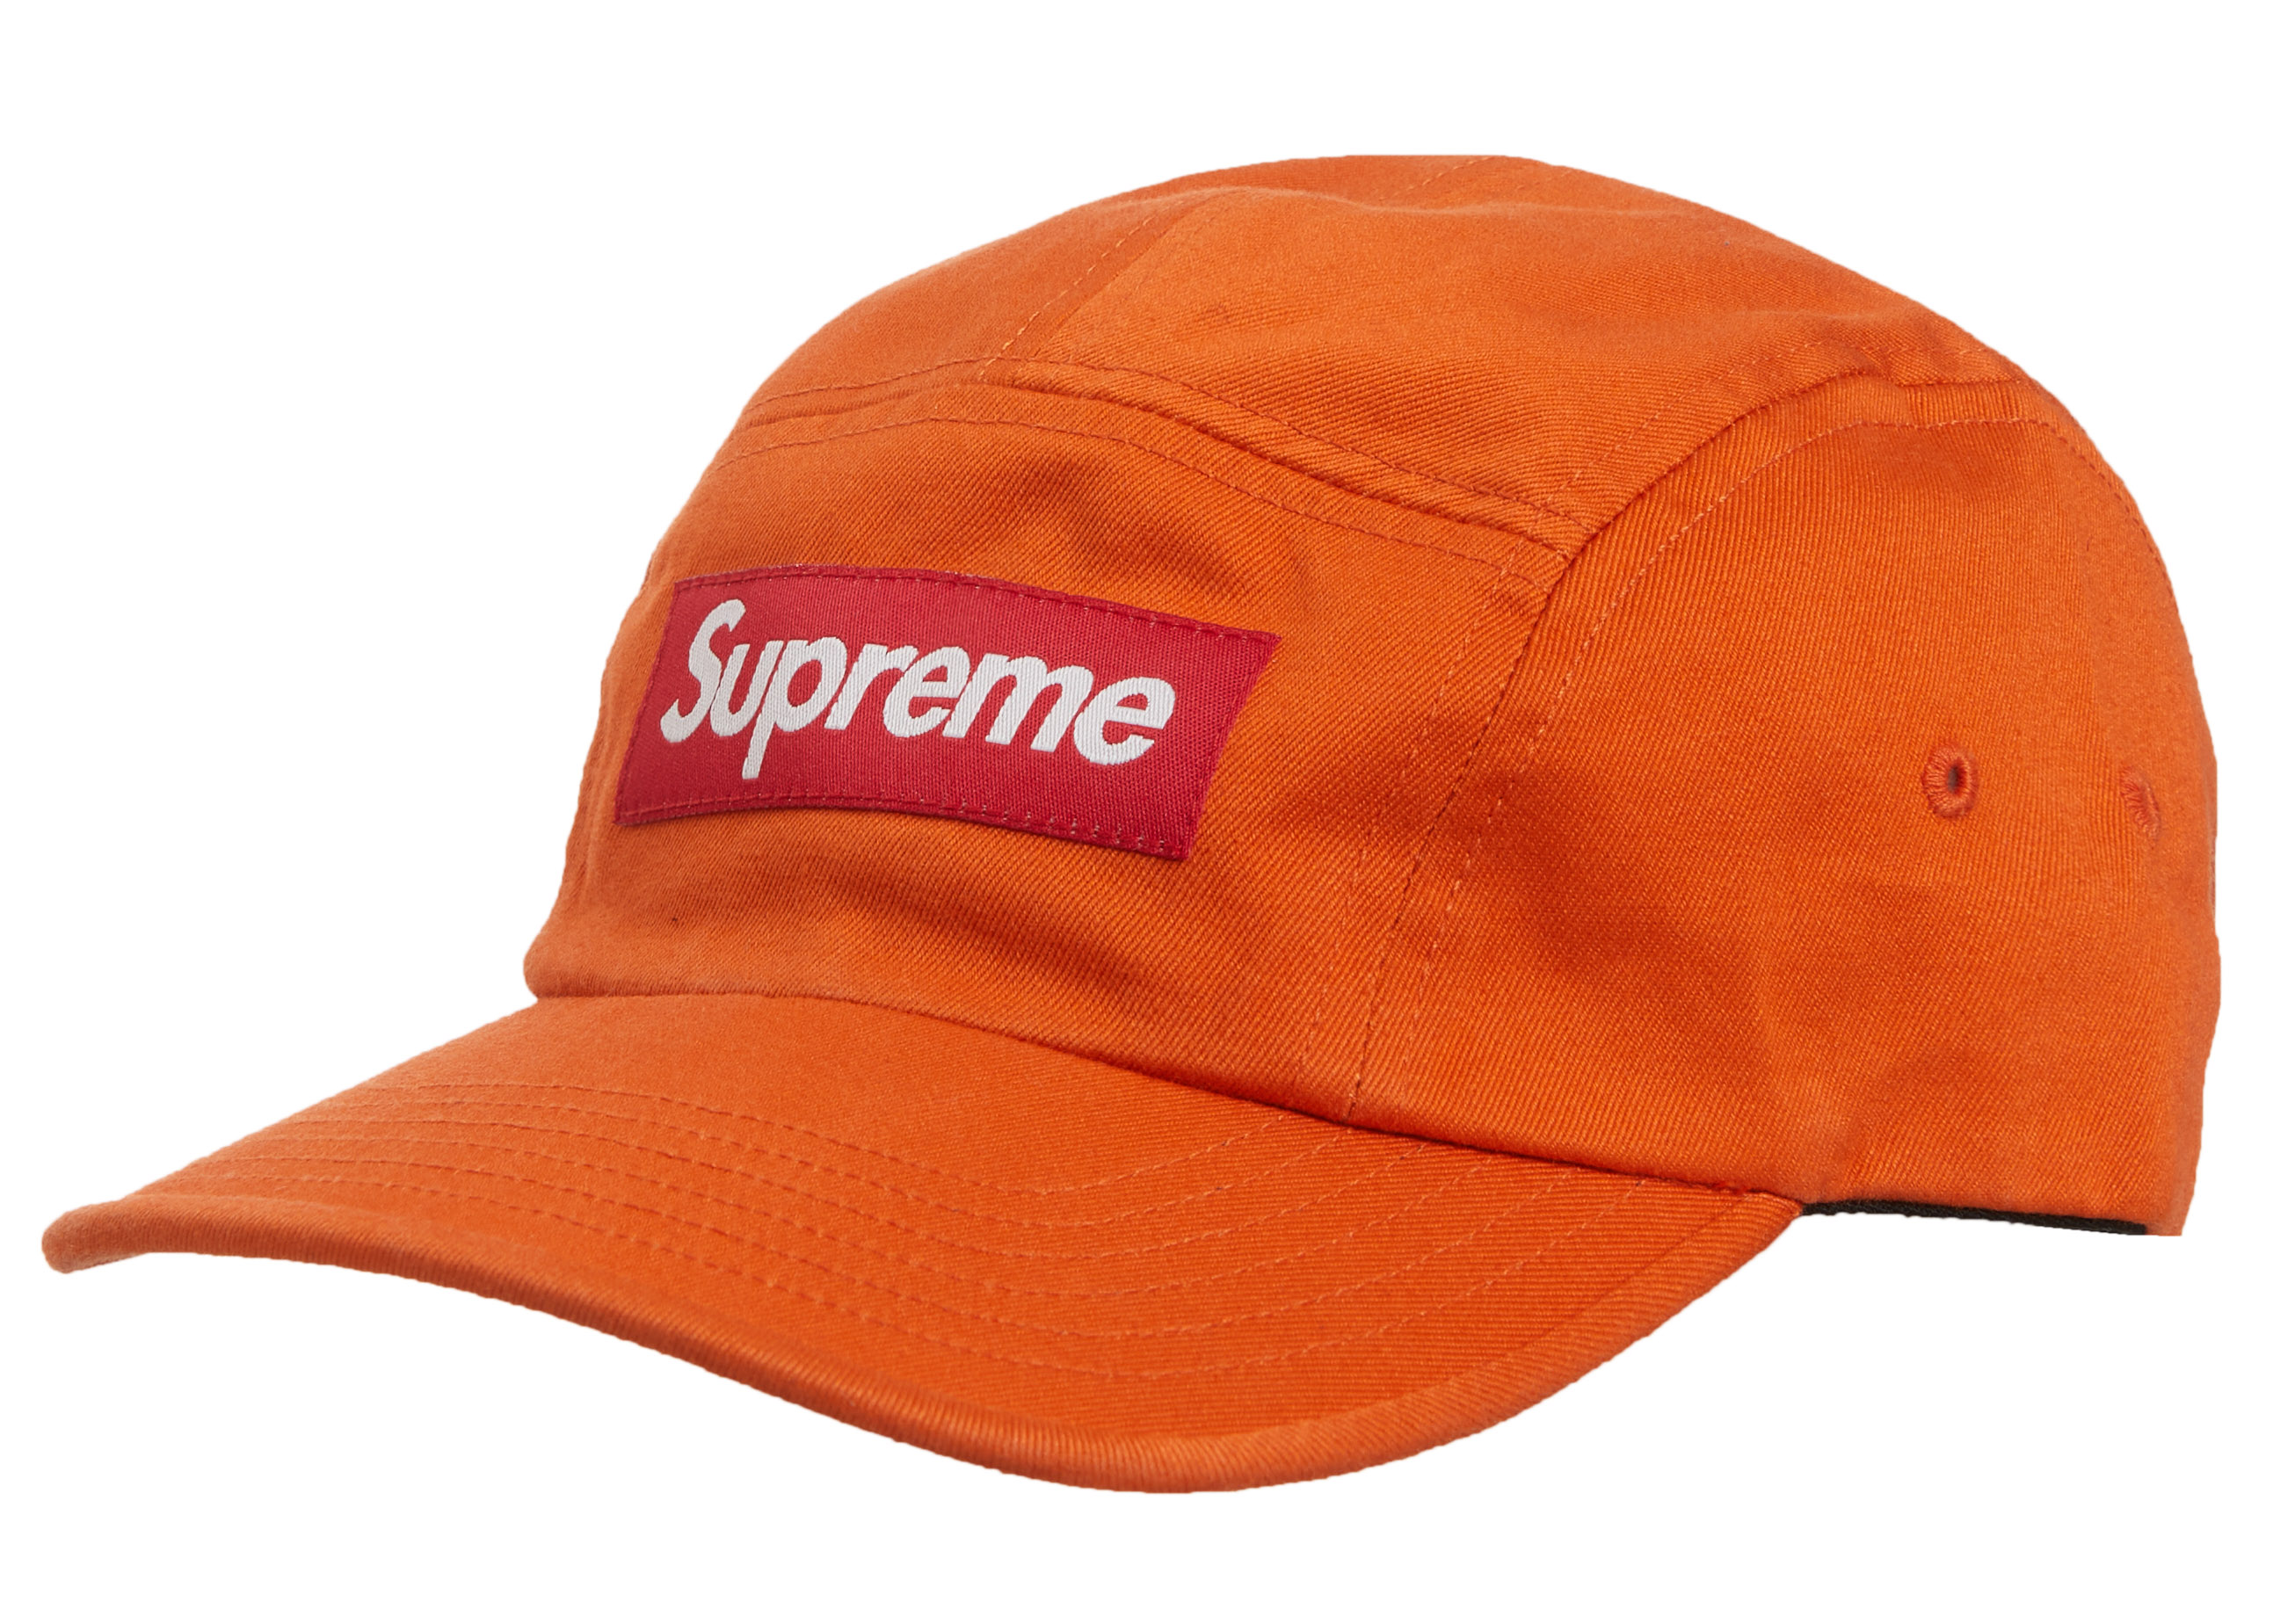 Supreme キャップ S logo MADE IN USA アメリカ製-